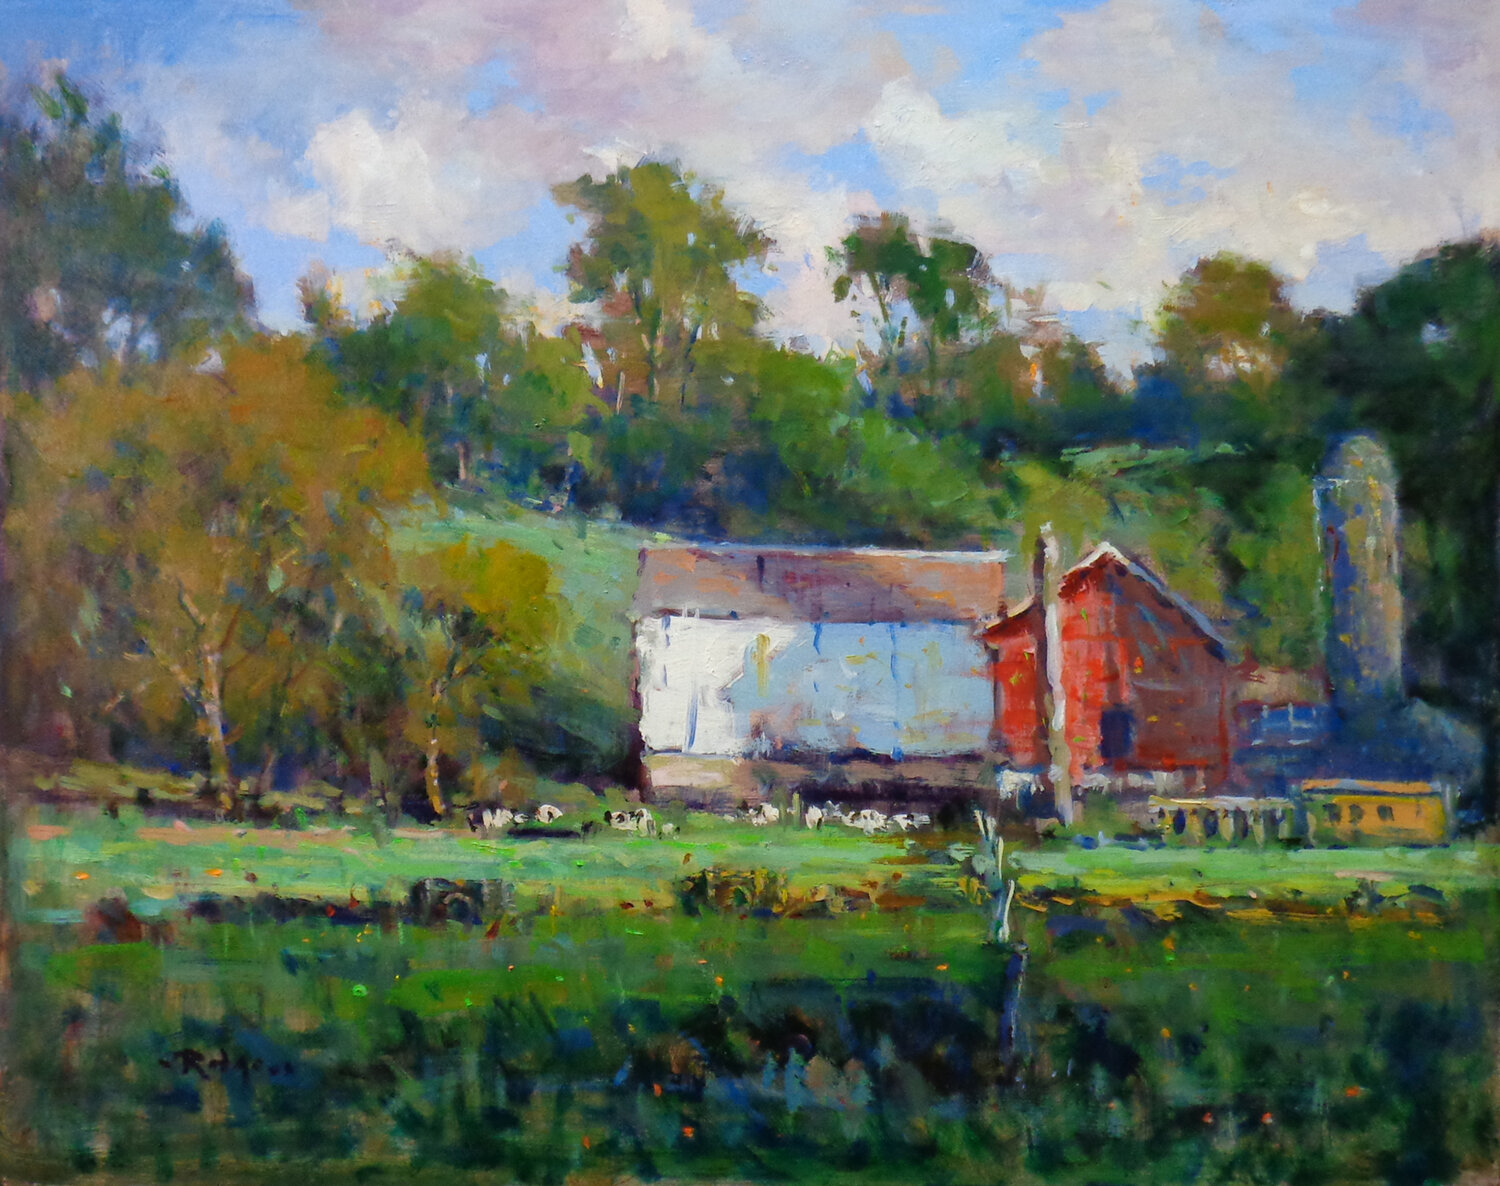 “Morning Hillside“ is an oil on board by Jim Rodgers.